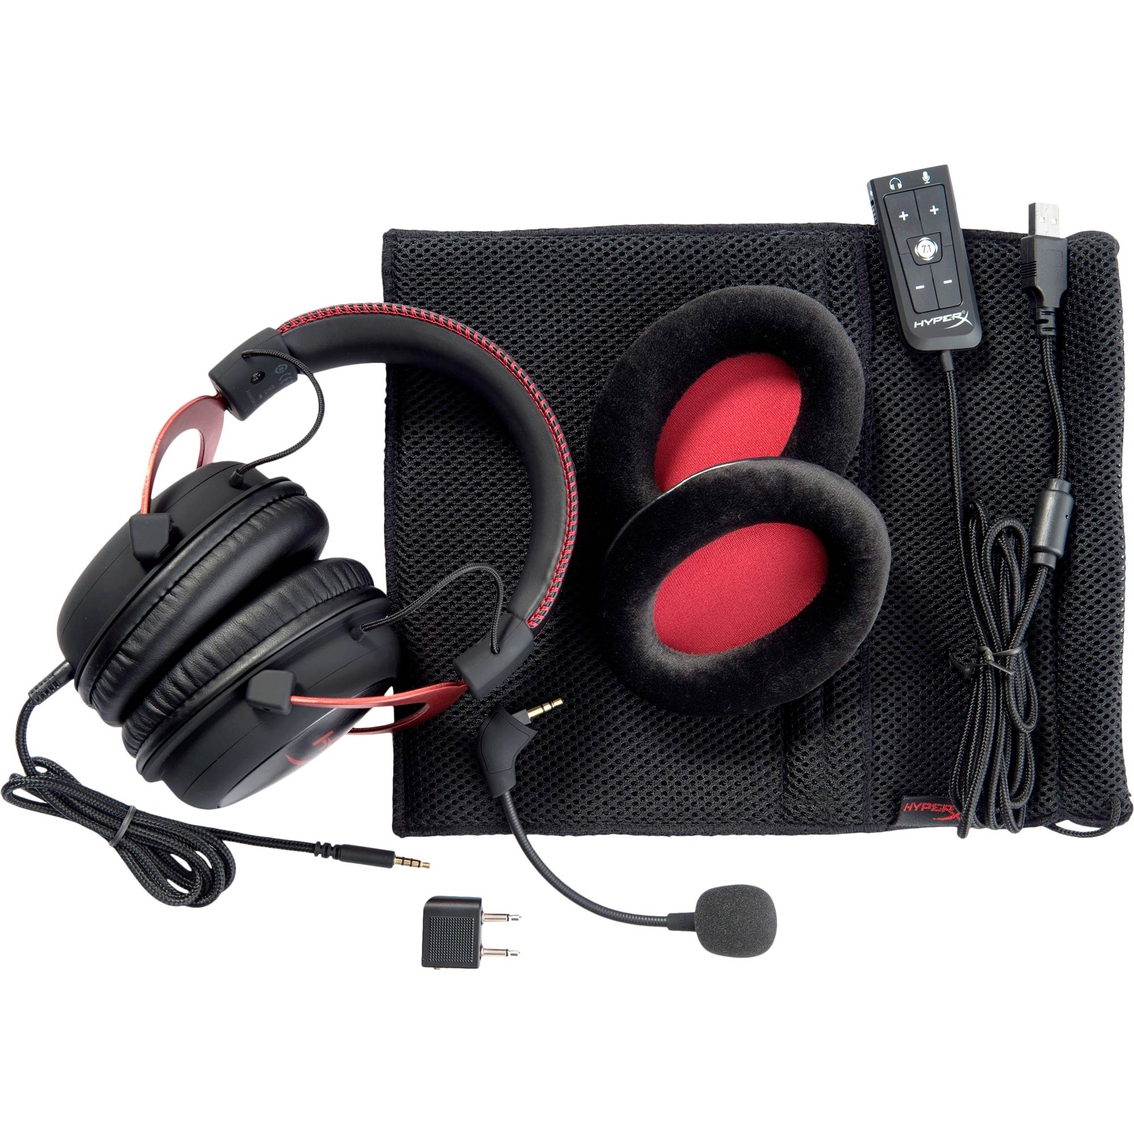 Kingston Hyperx Cloud Ii Gaming Headset For Pc Ps4 Mobile Red And Black Xbox One Accessories Electronics Shop The Exchange